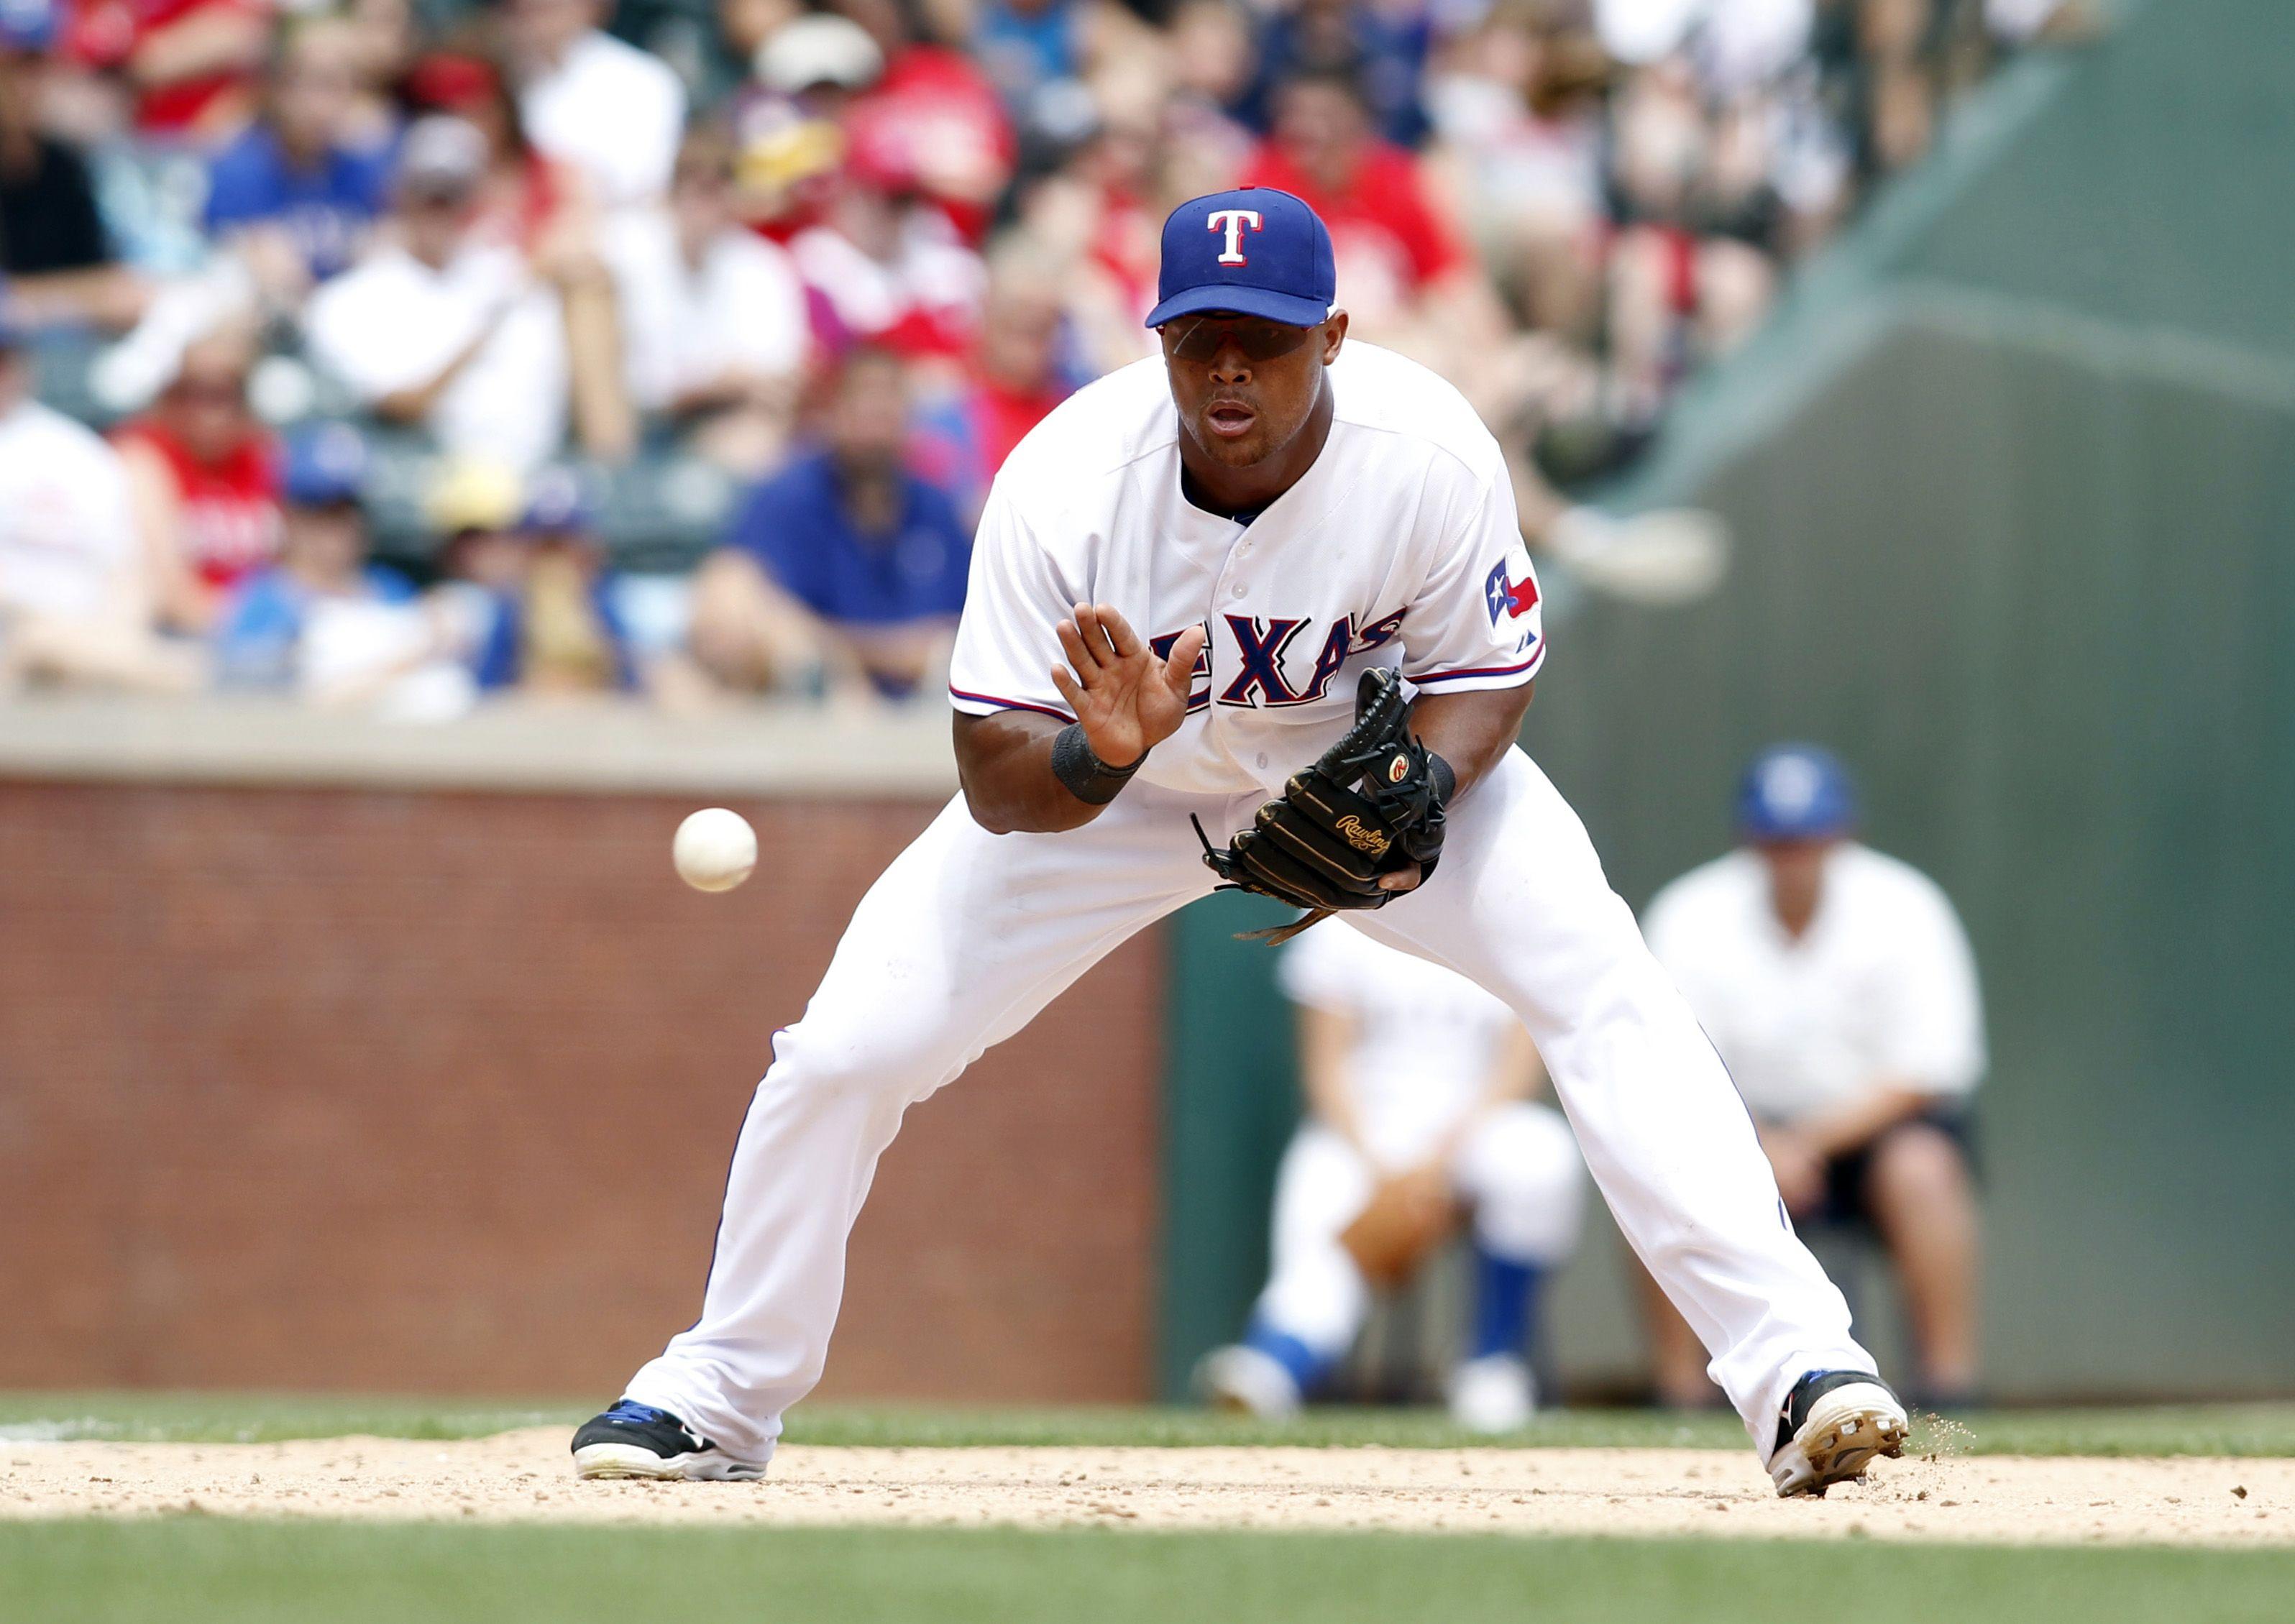 Texas Rangers: Rangers to be cautious with Adrian Beltre; return